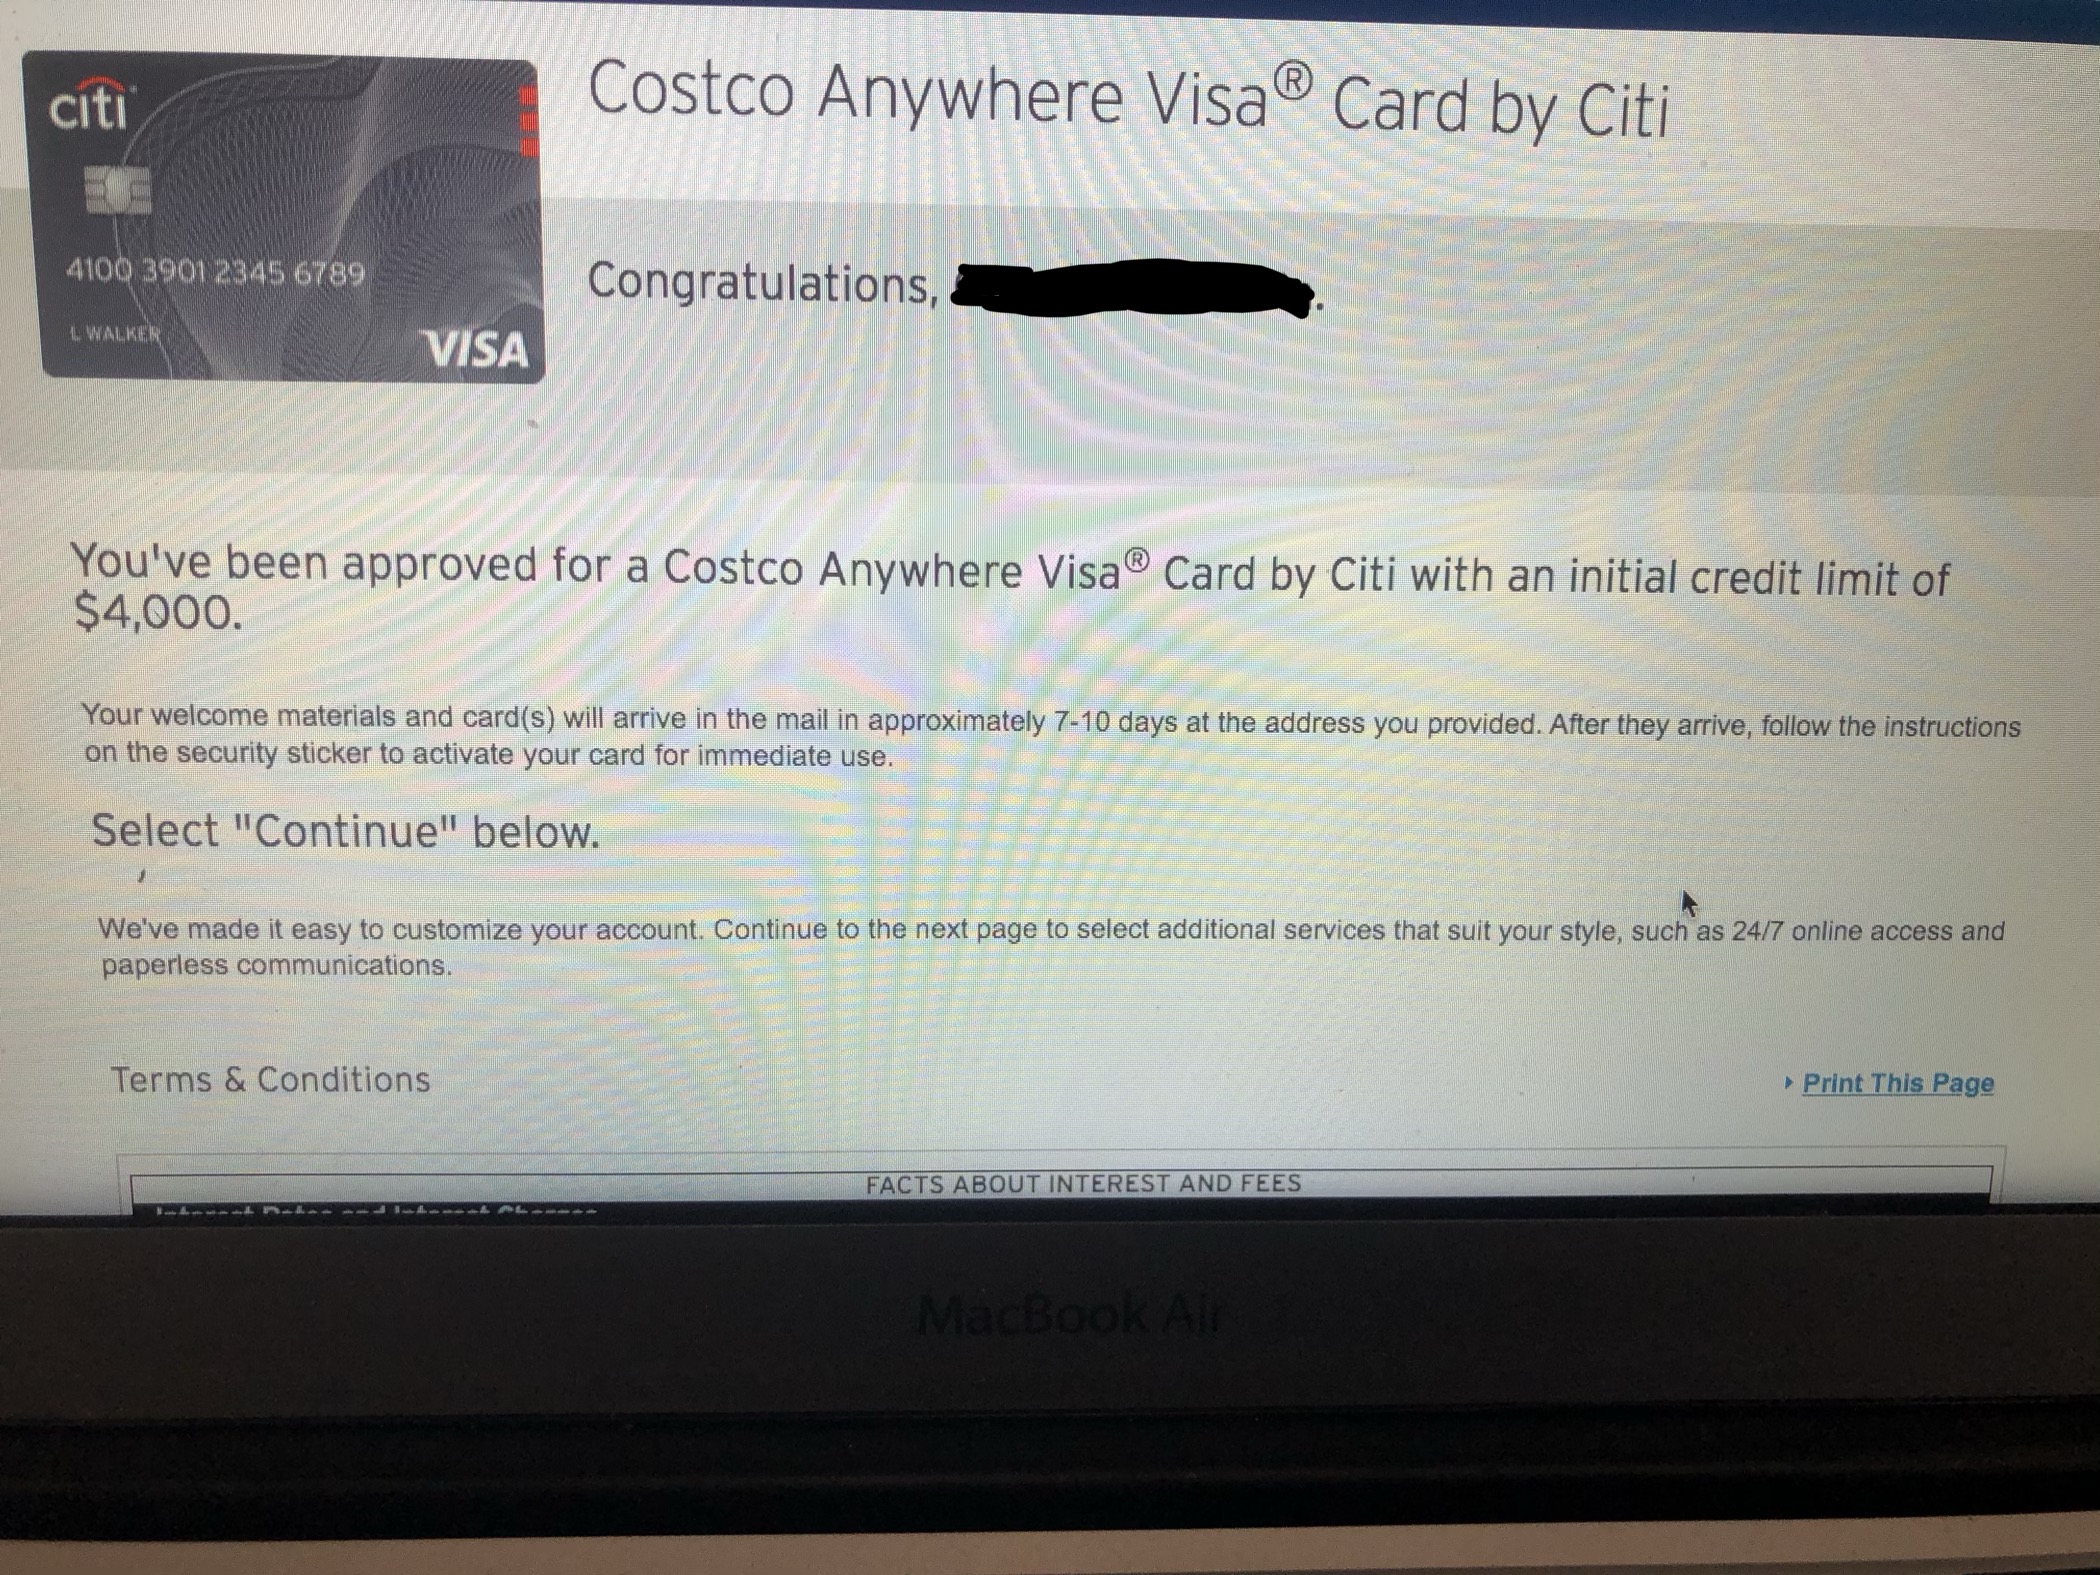 citi-costco-approval-page-4-myfico-forums-5987826